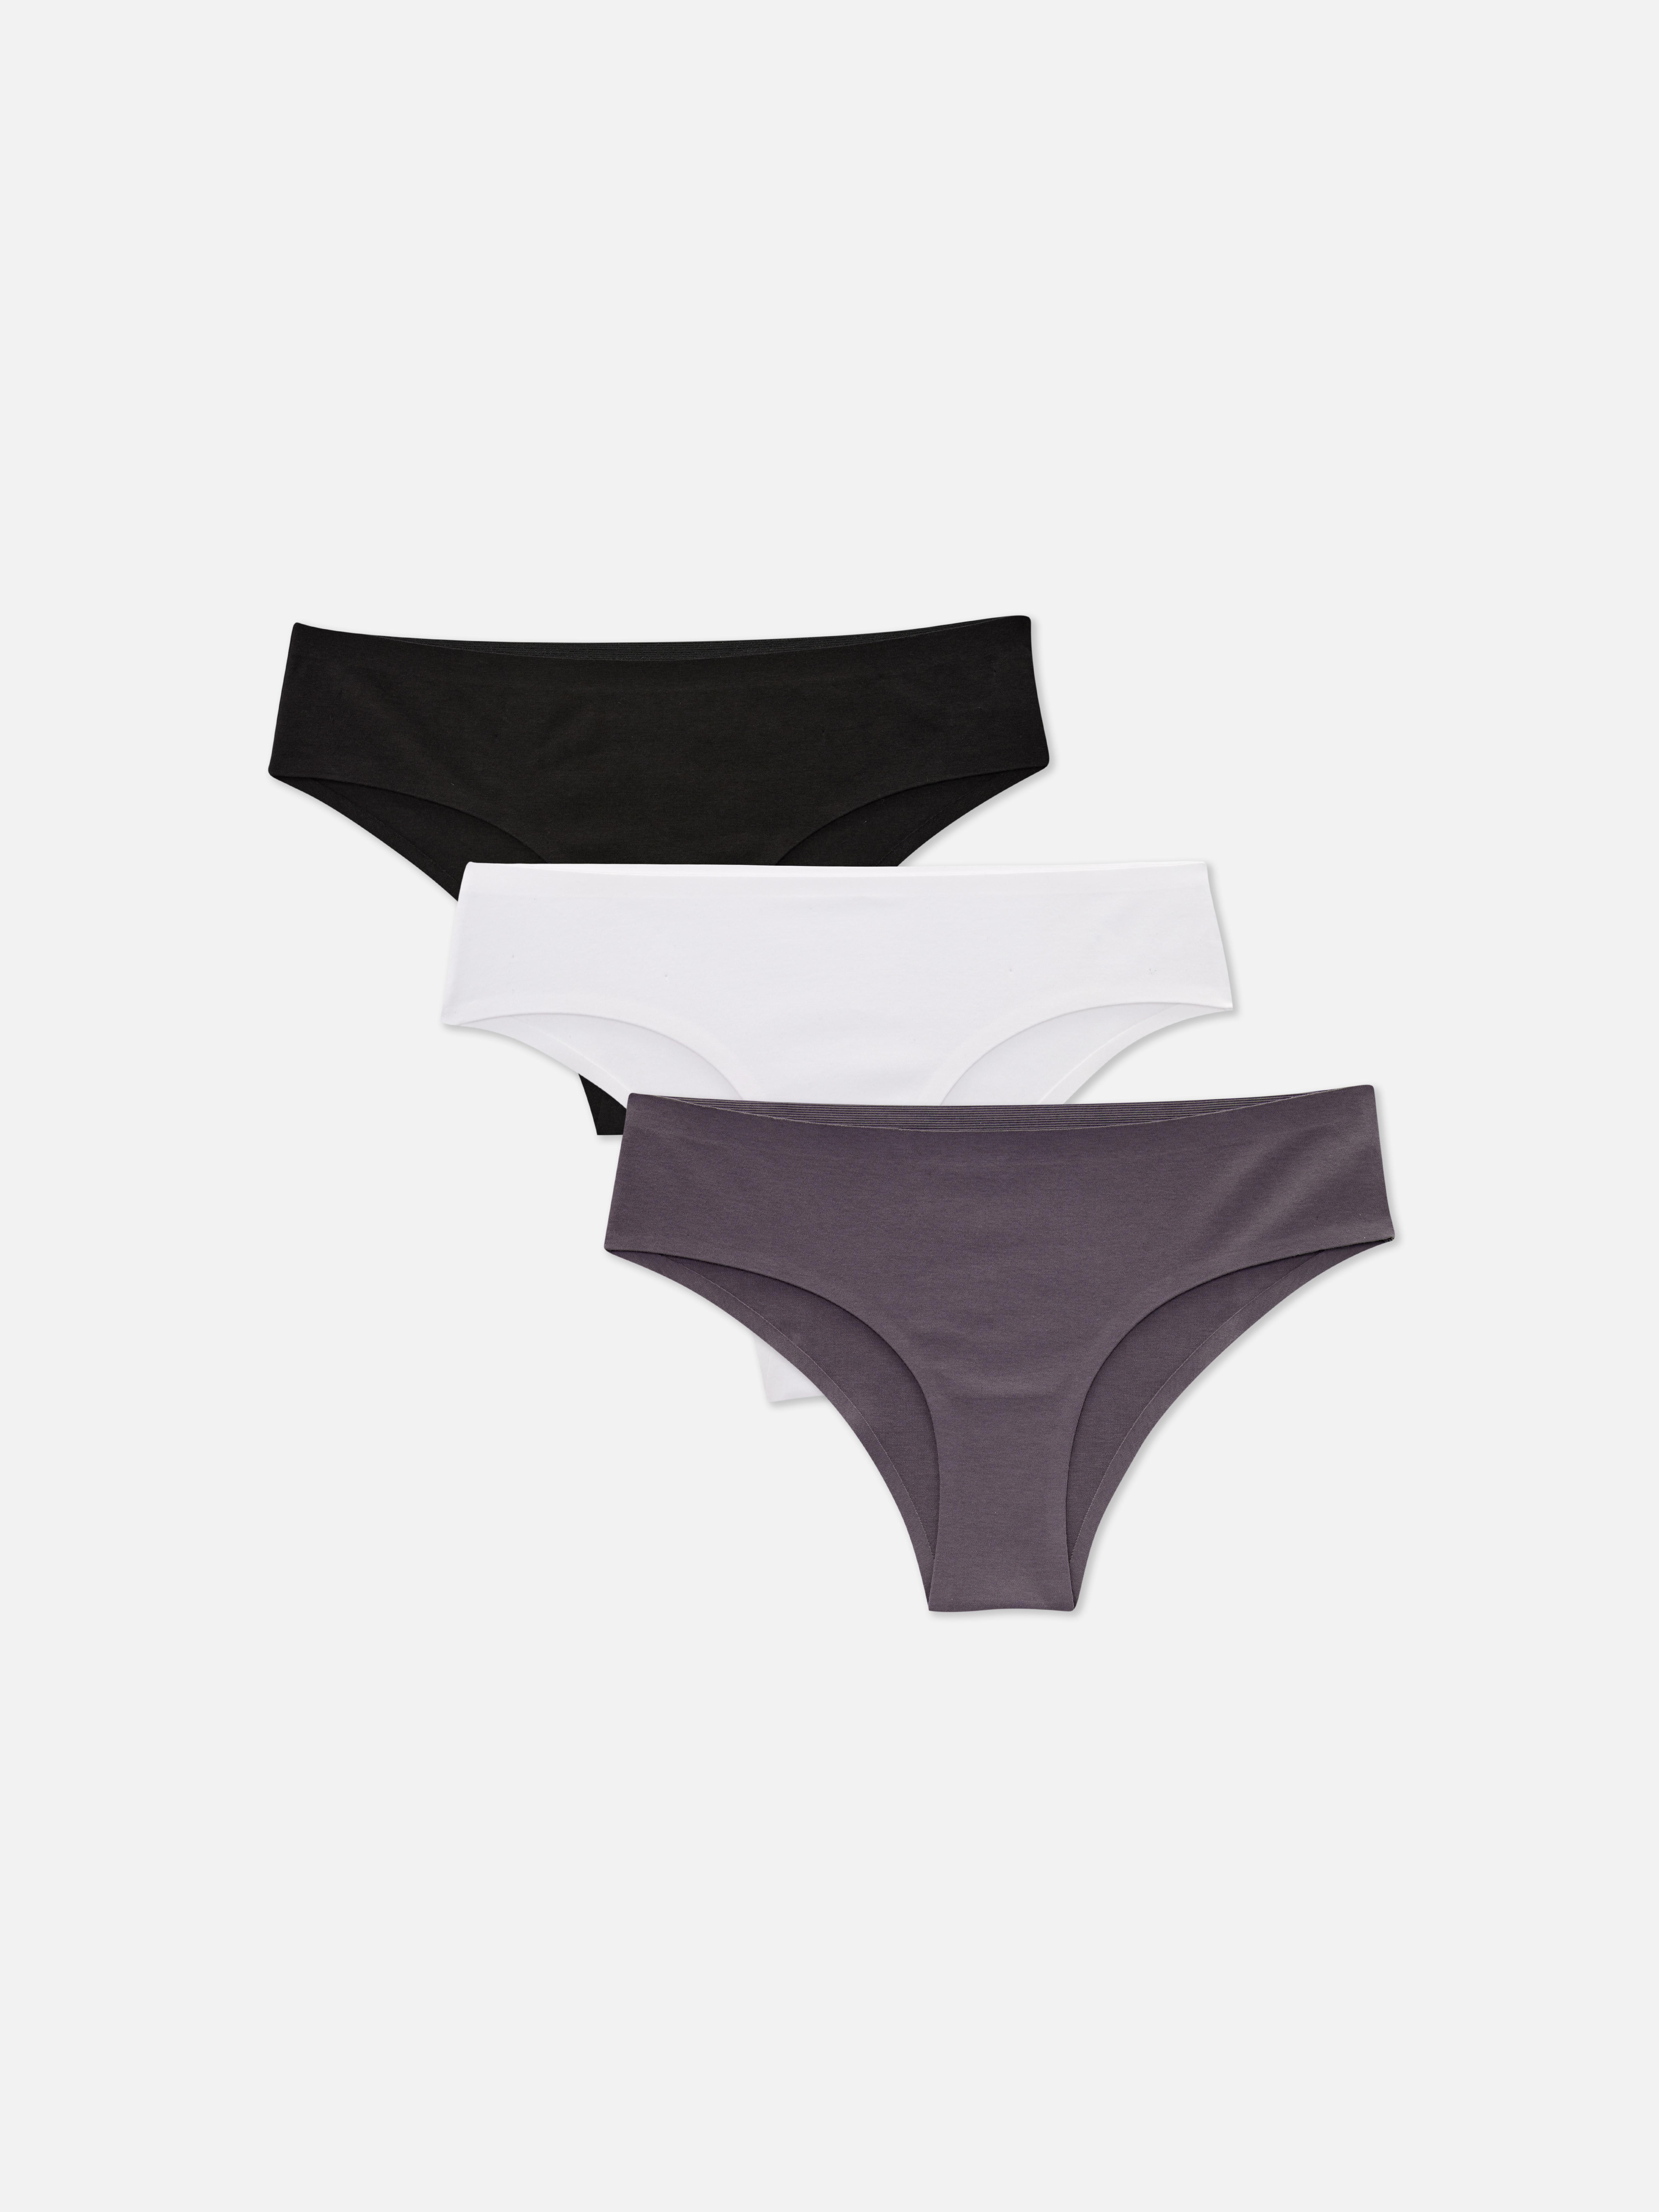 PRIMARK LADIES HIPSTER briefs 3 pack Size XS - XL knickers 🐾 £12.00 -  PicClick UK